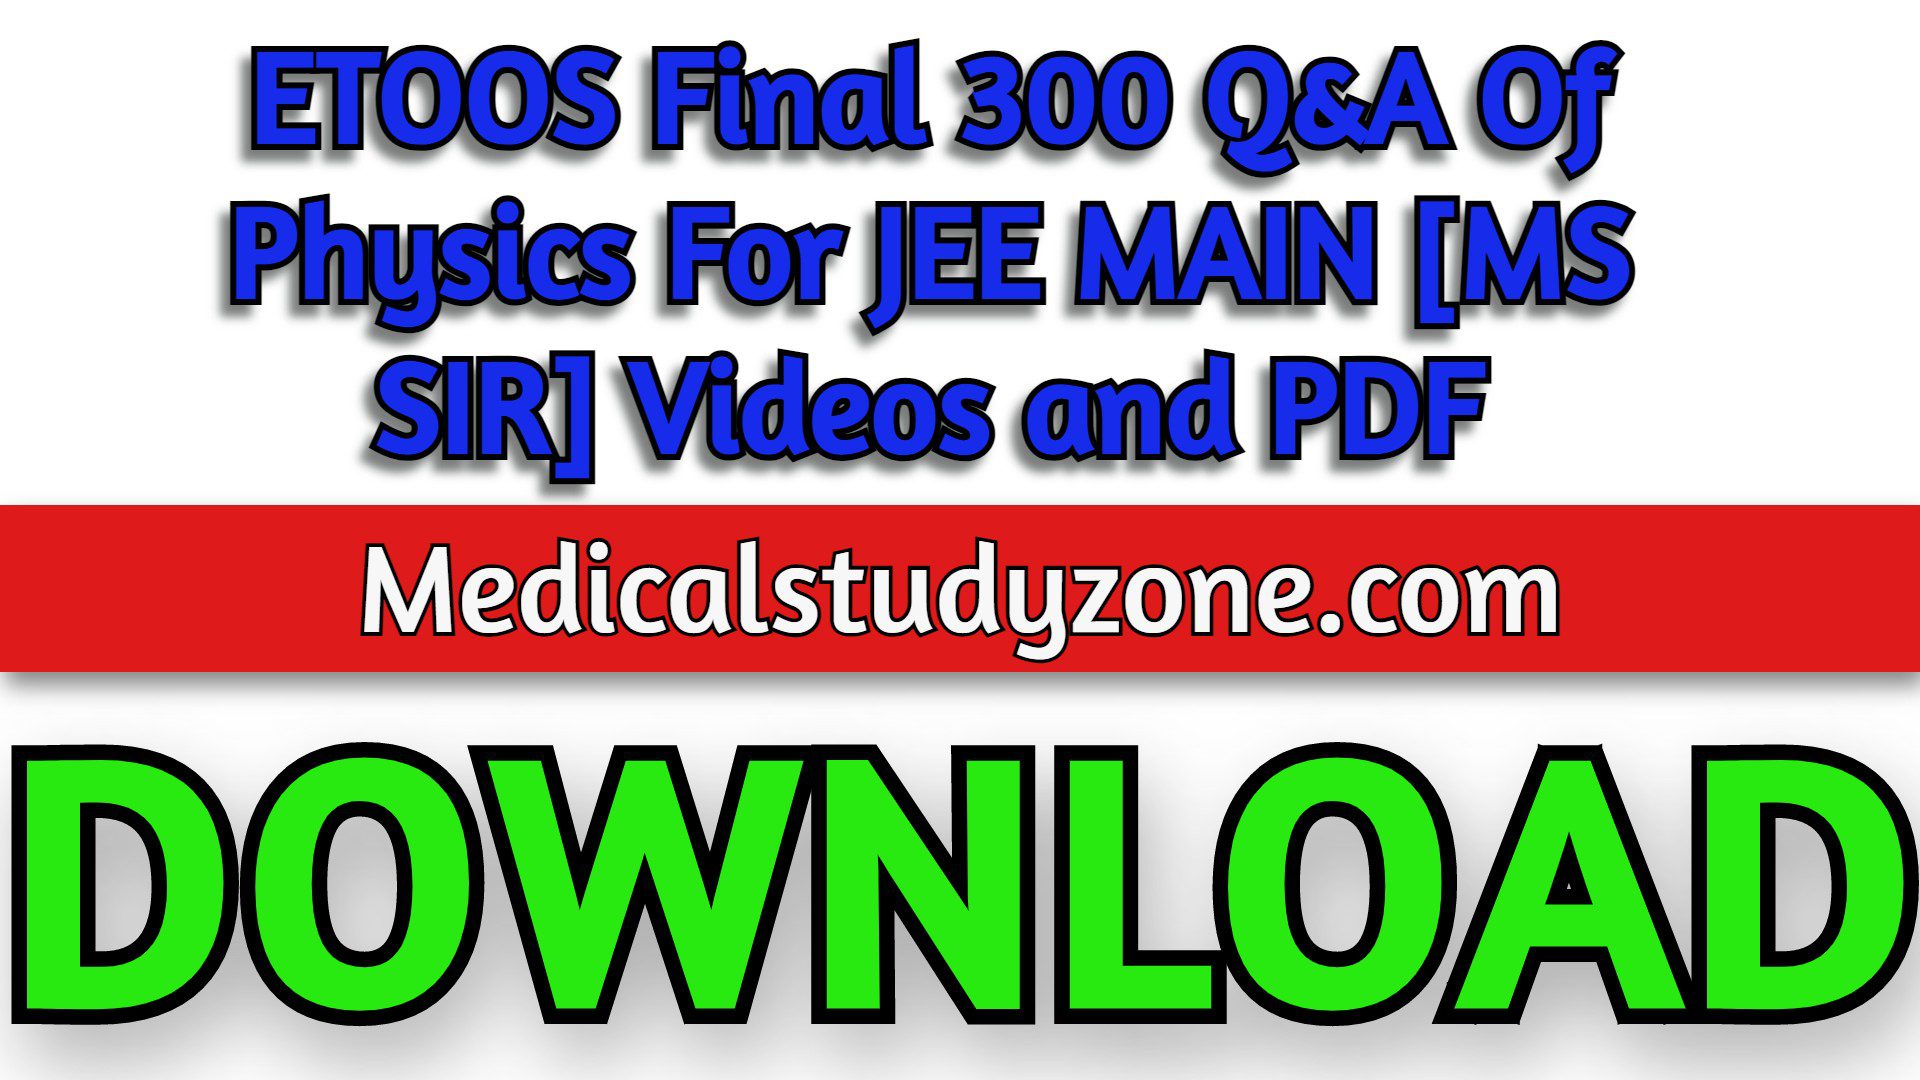 ETOOS Final 300 Q&A Of Physics For JEE MAIN [MS SIR] Videos and PDF Free Download